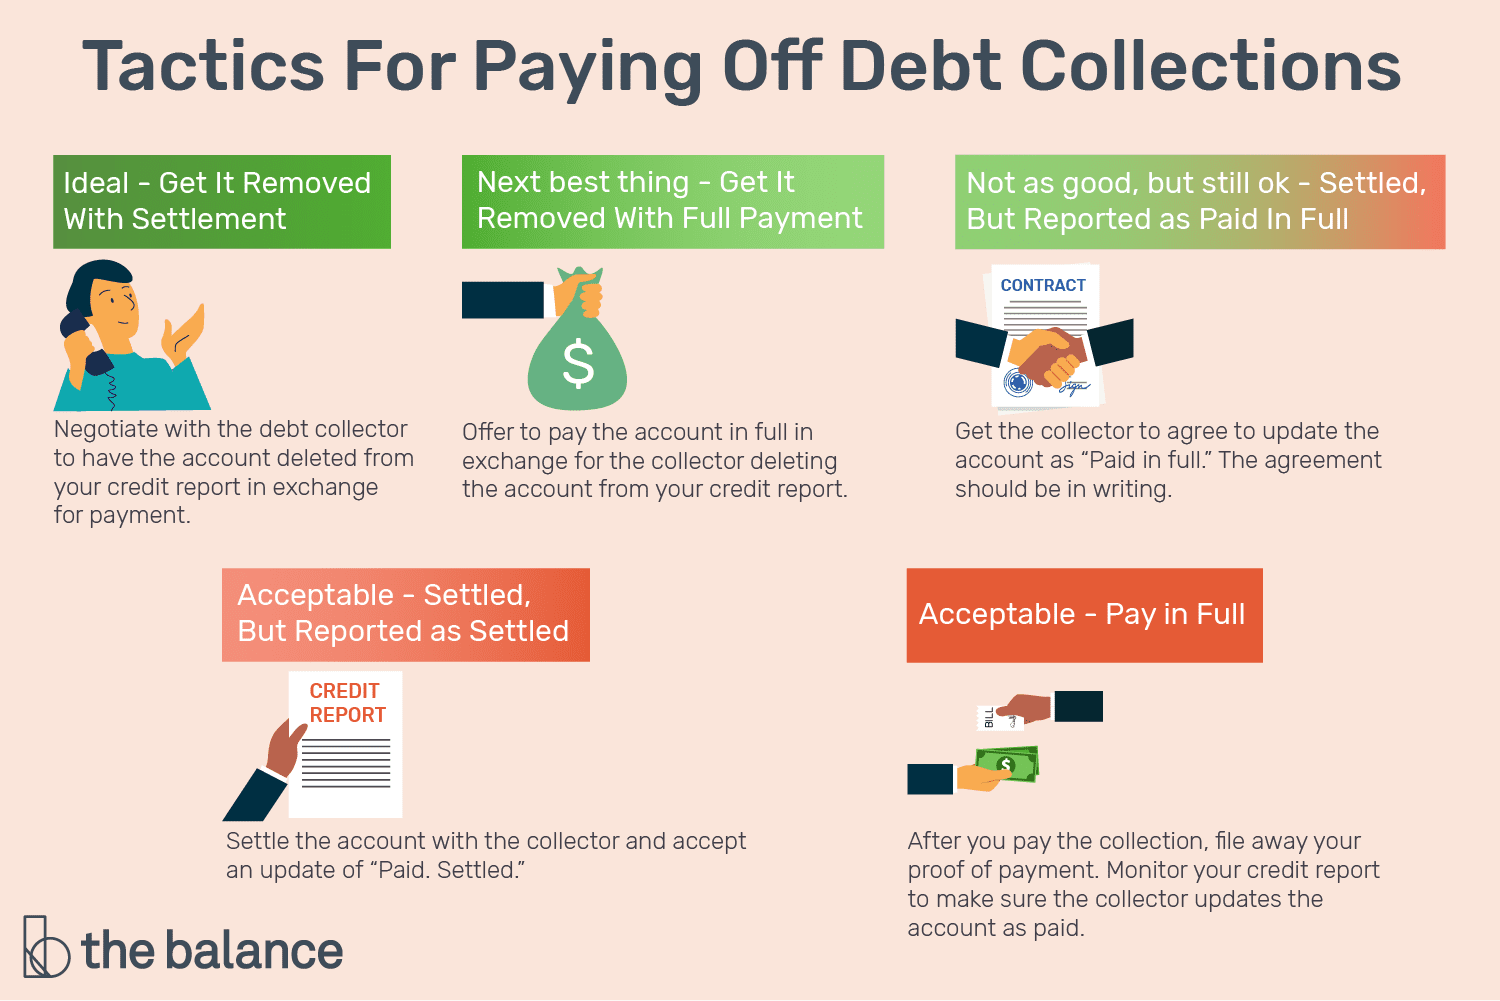 Tactics For Paying Off Debt Collections